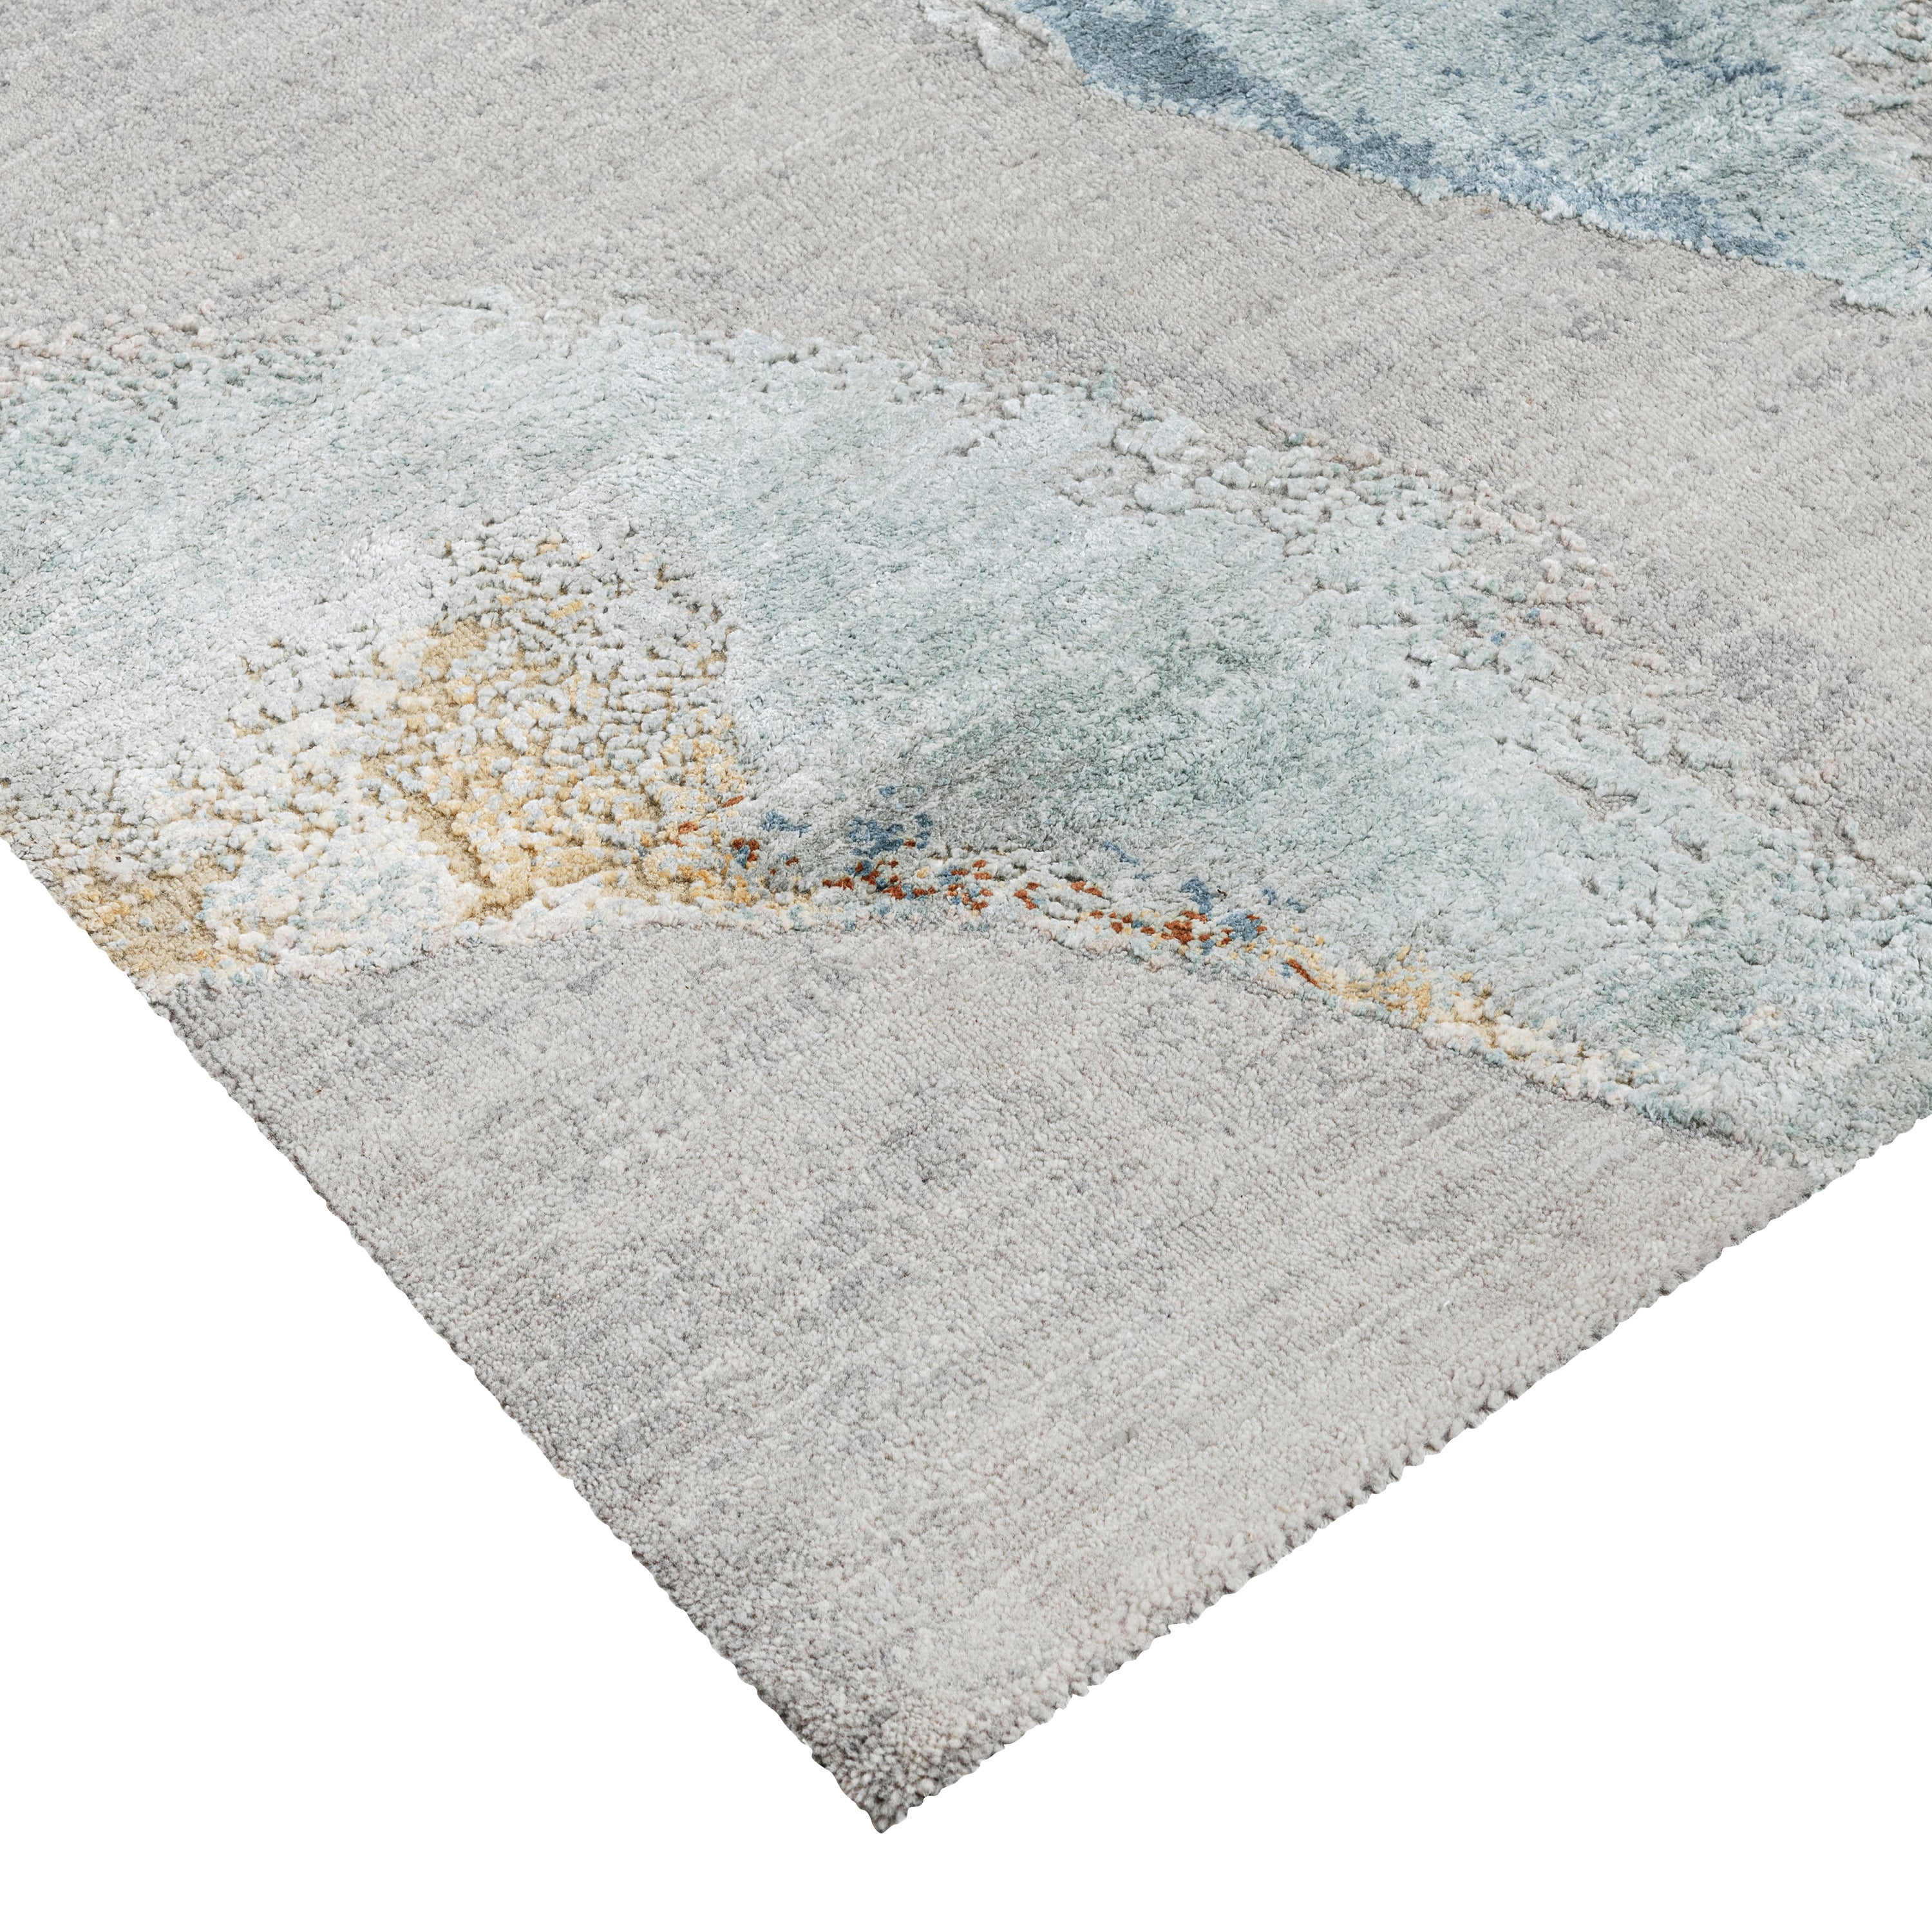 Multicolored Contemporary Wool Silk Blend Rug - 10' x 13'1"